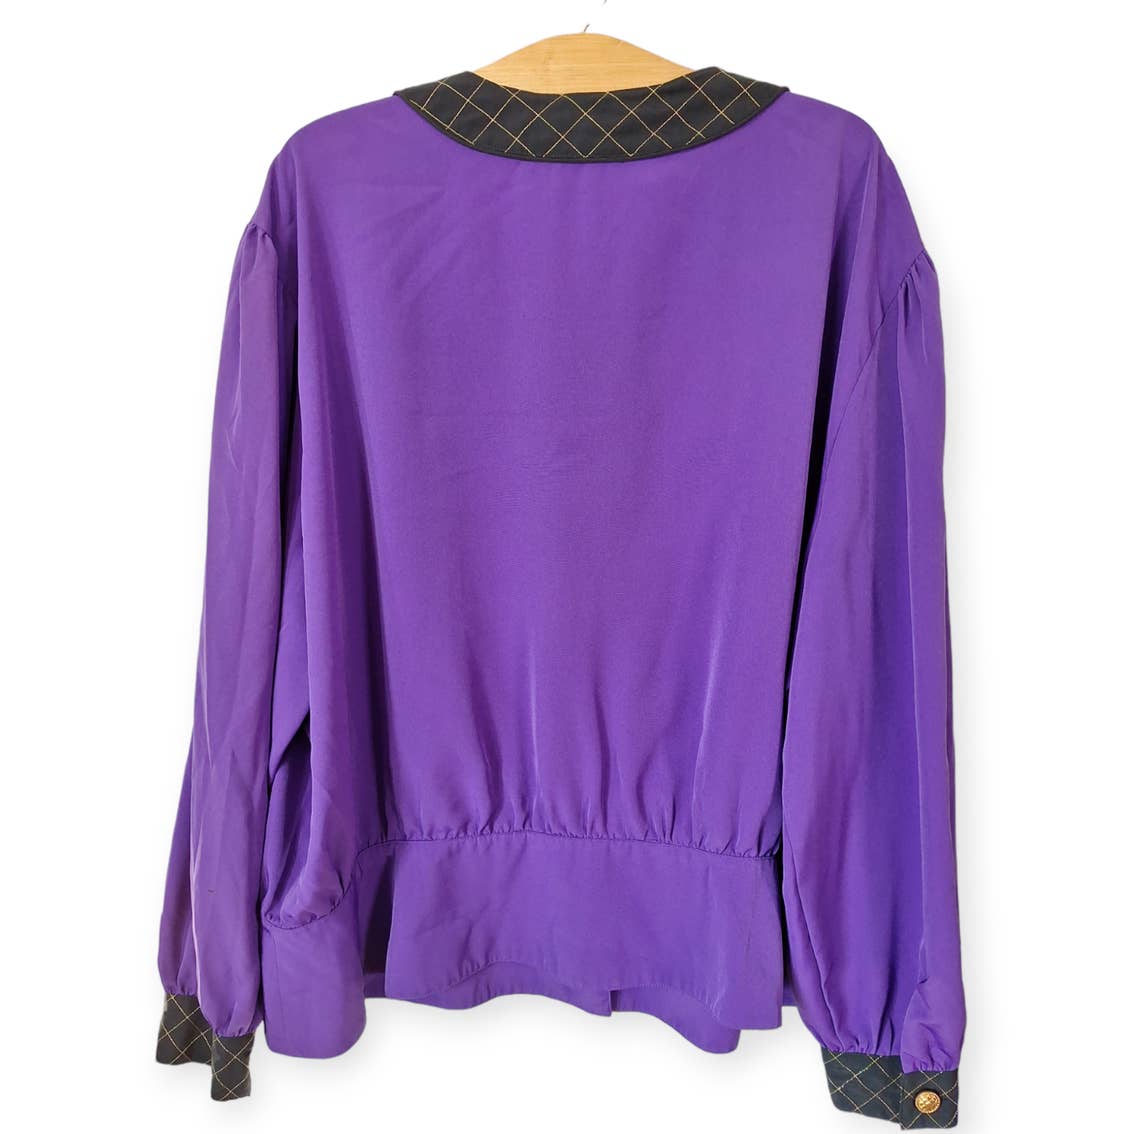 Vintage 80s Purple Balloon Sleeve Blouse Women Size 20/22 2X/3X AS IS - themallvintage The Mall Vintage